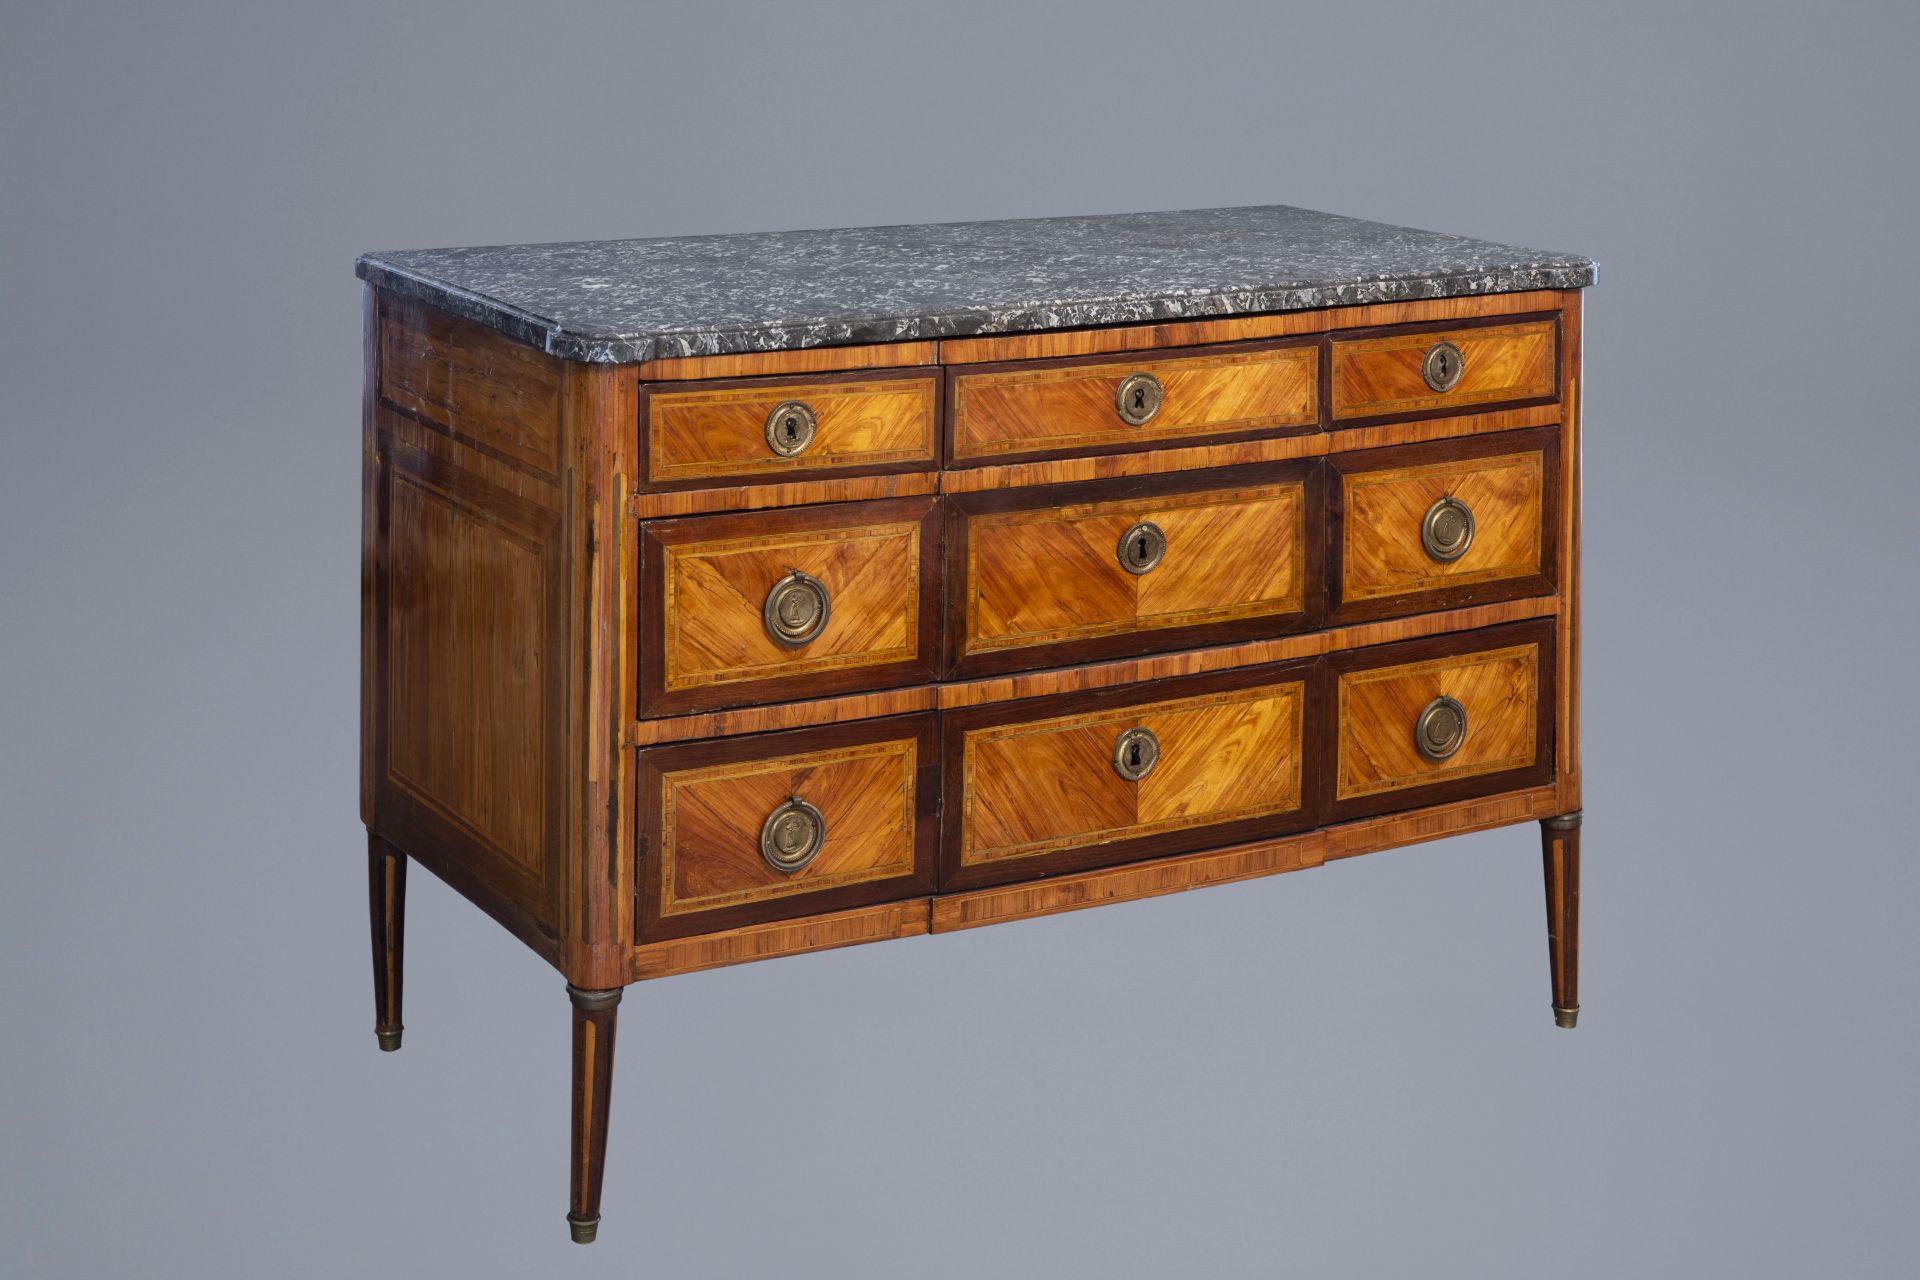 A French mahogany veneered Louis XVI chest of drawers with marble top, late 18th C.